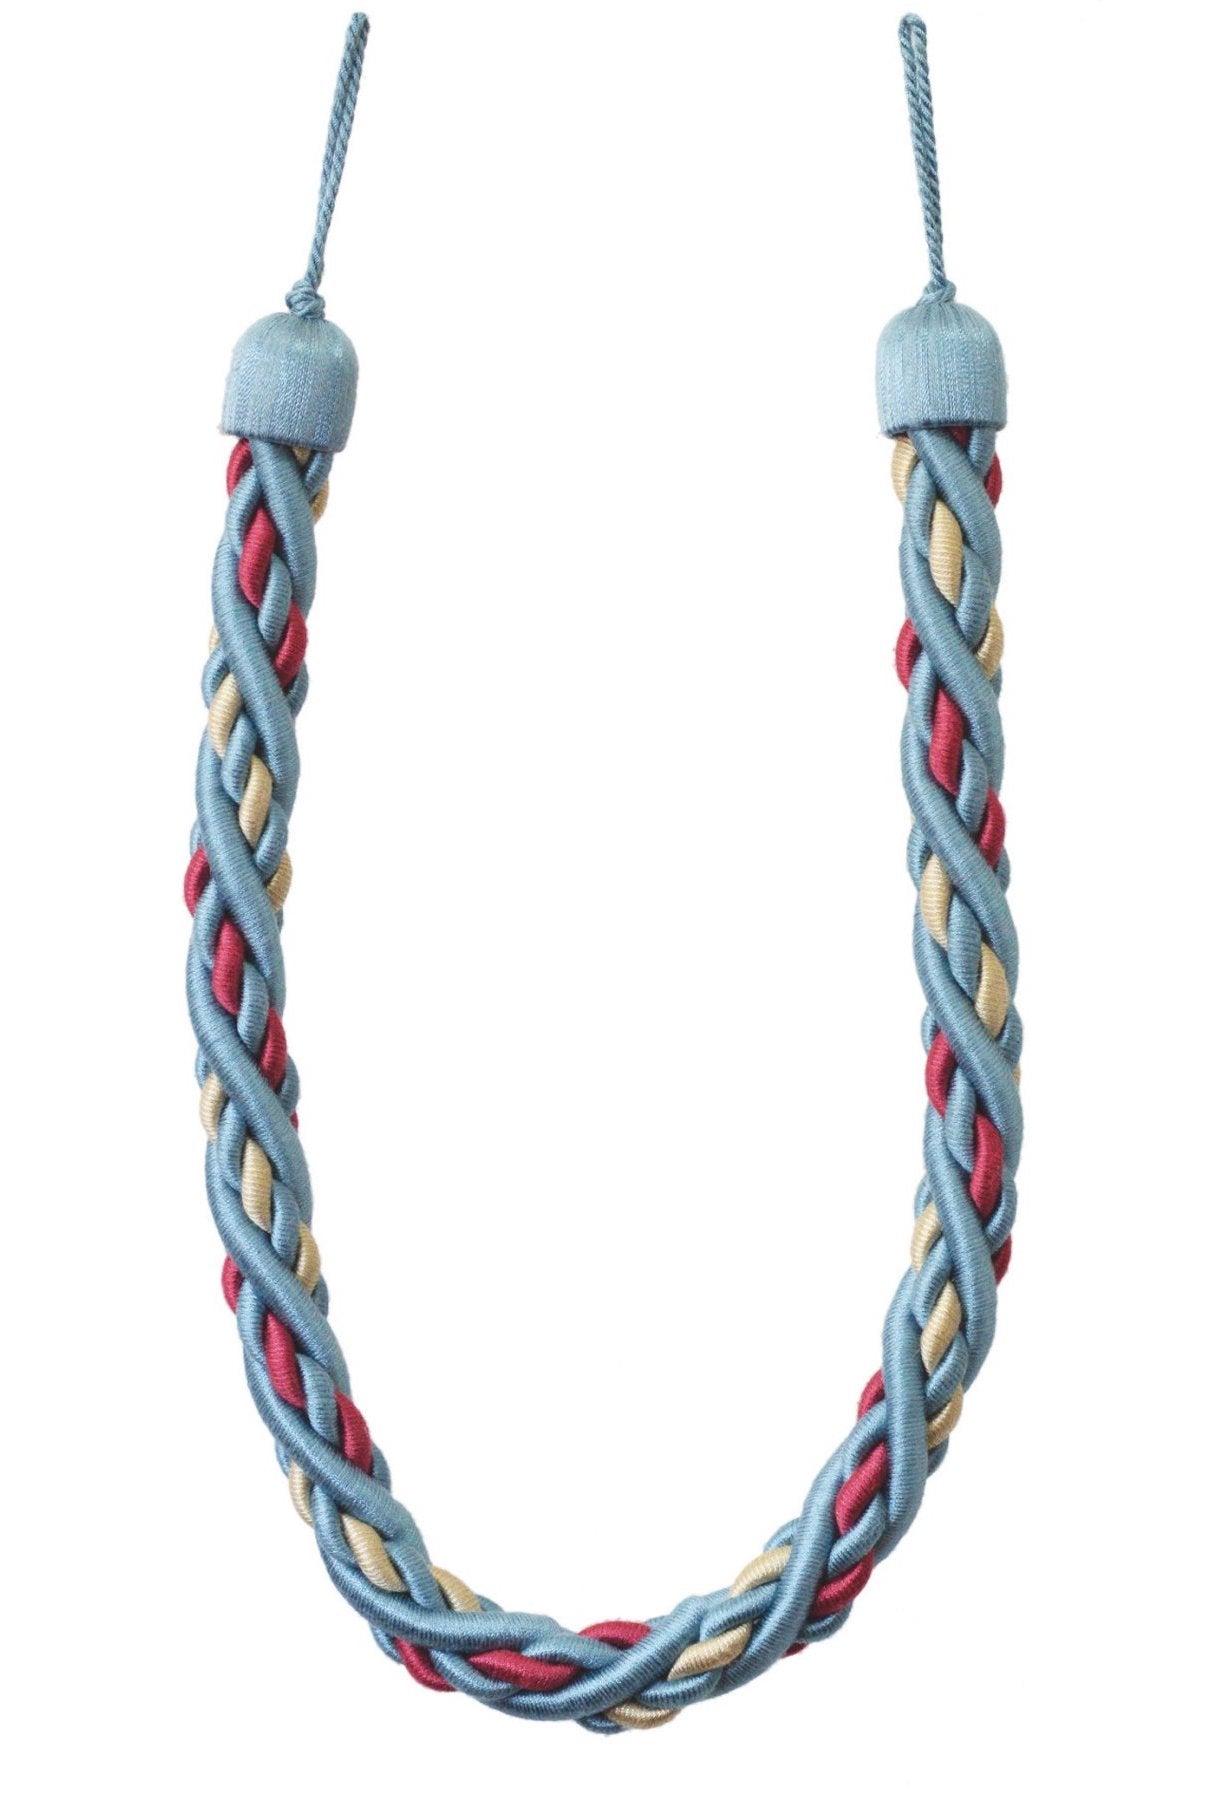 Pair of Twisted Montpelier Tie Back Ropes - 920mm